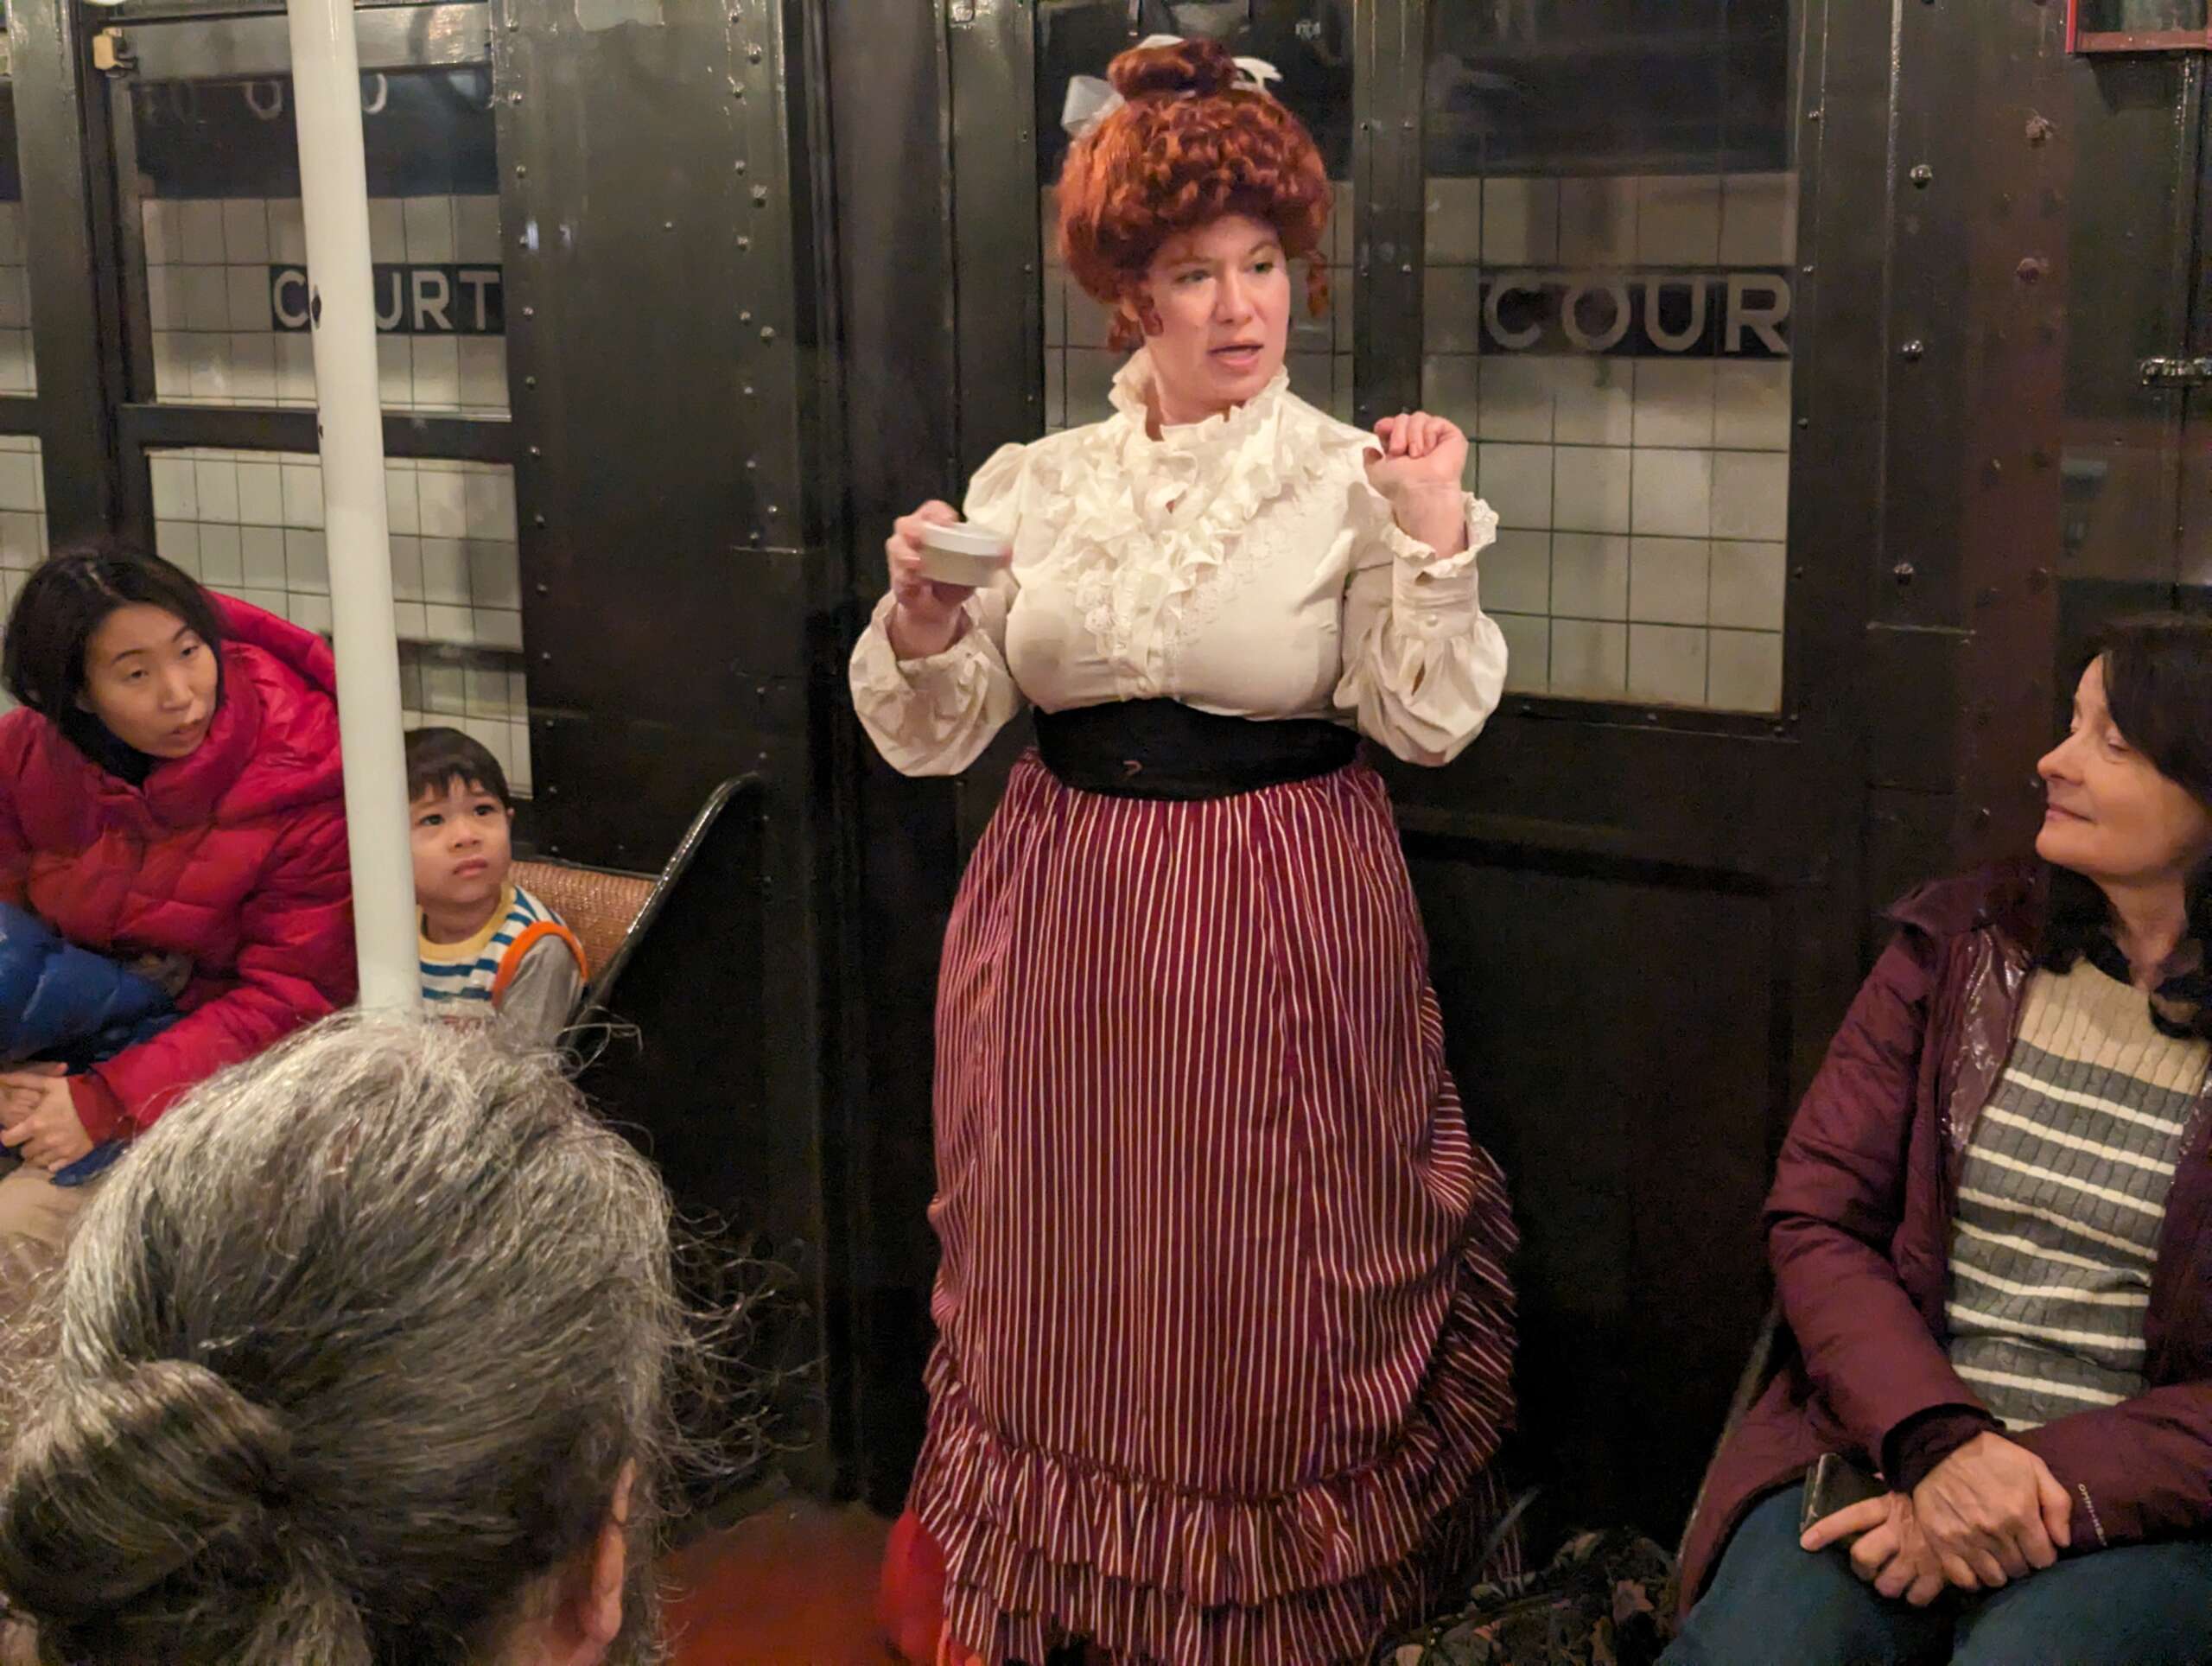 A Costumed Storyteller dressed as Mary Walton give a performance in a vintage train car attended by adults and children.